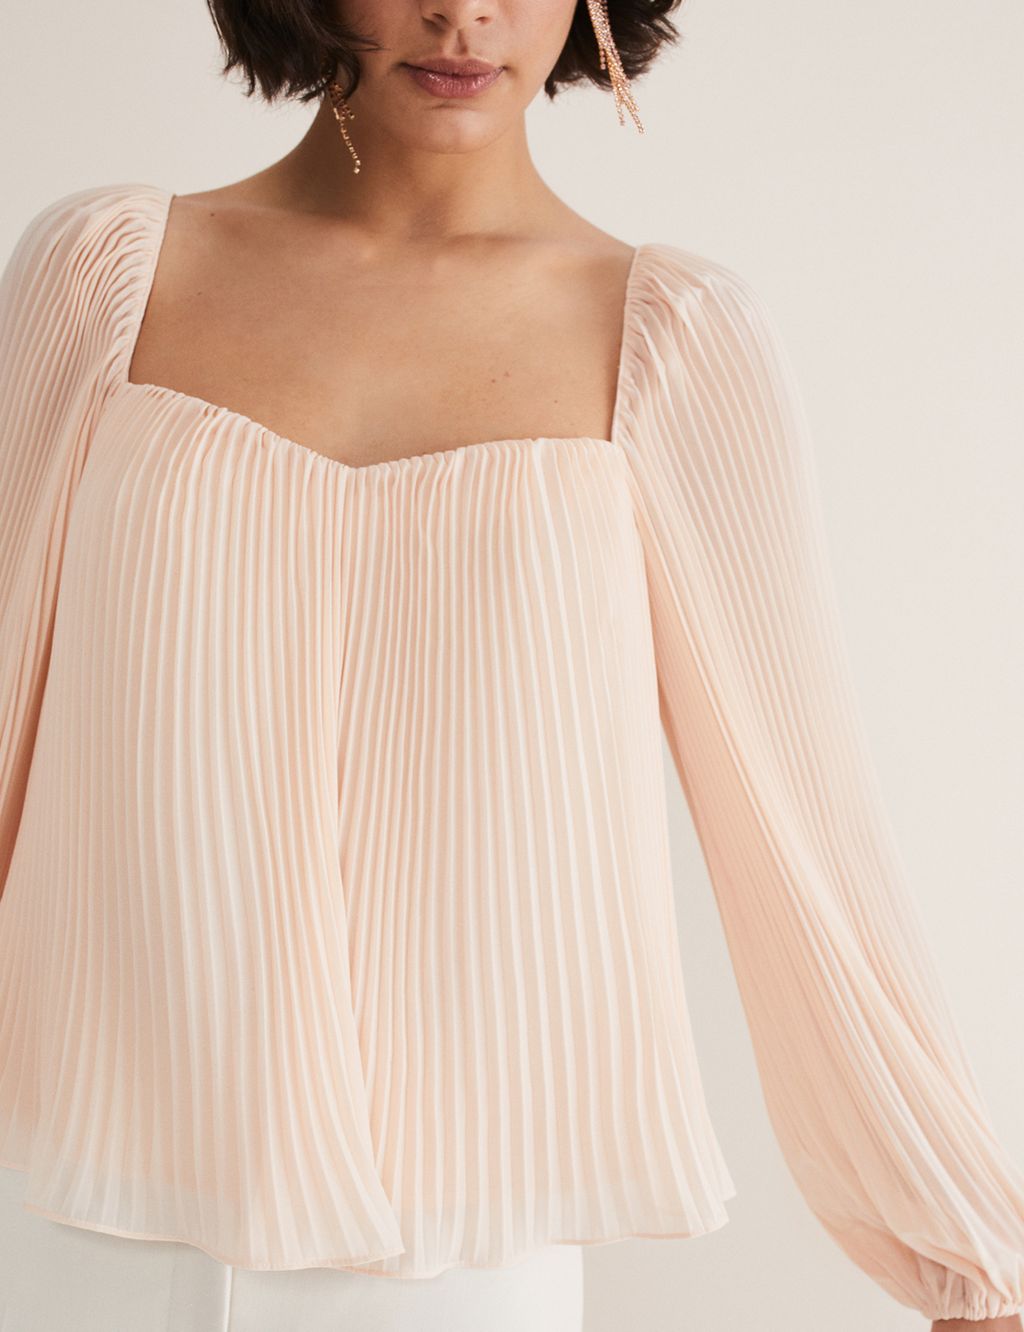 Pleated Square Neck Top image 5